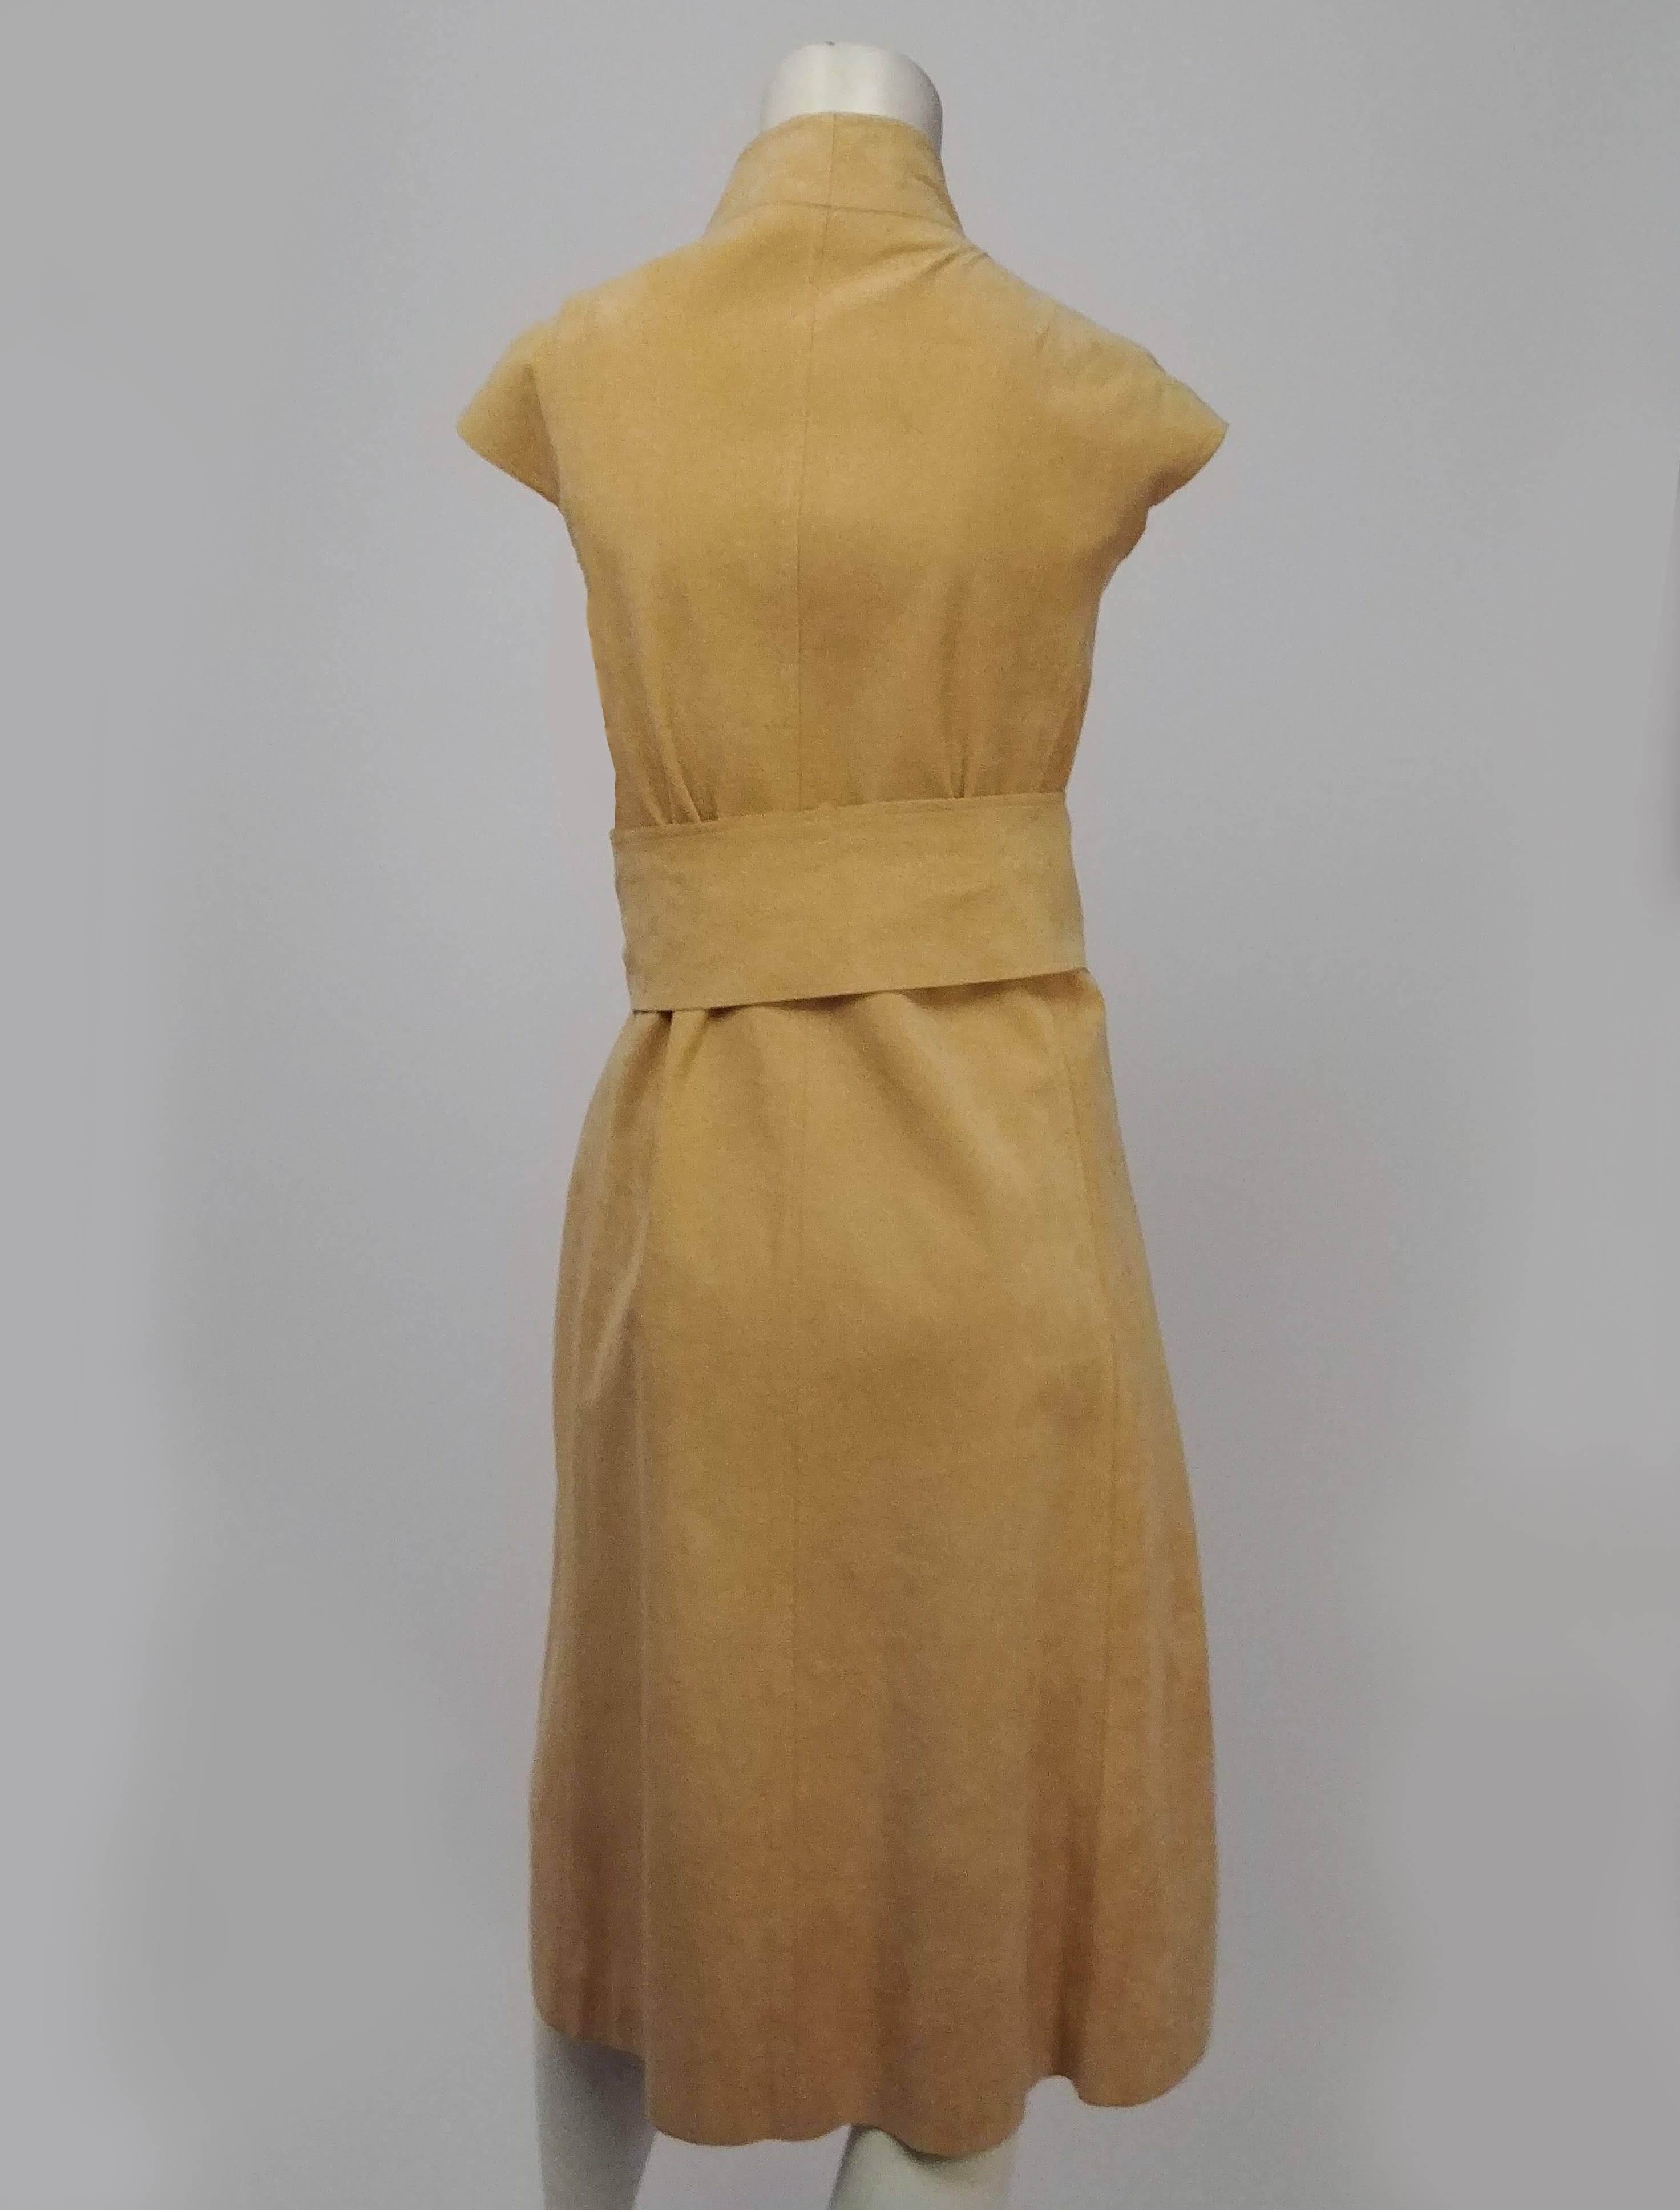 1980s Halston Vegan Suede Wrap Dress. Tan vegan suede wrap dress features structured collar and cap sleeves. Closes at front with snaps, and ties closed with removable belt. Full flared skirt. 